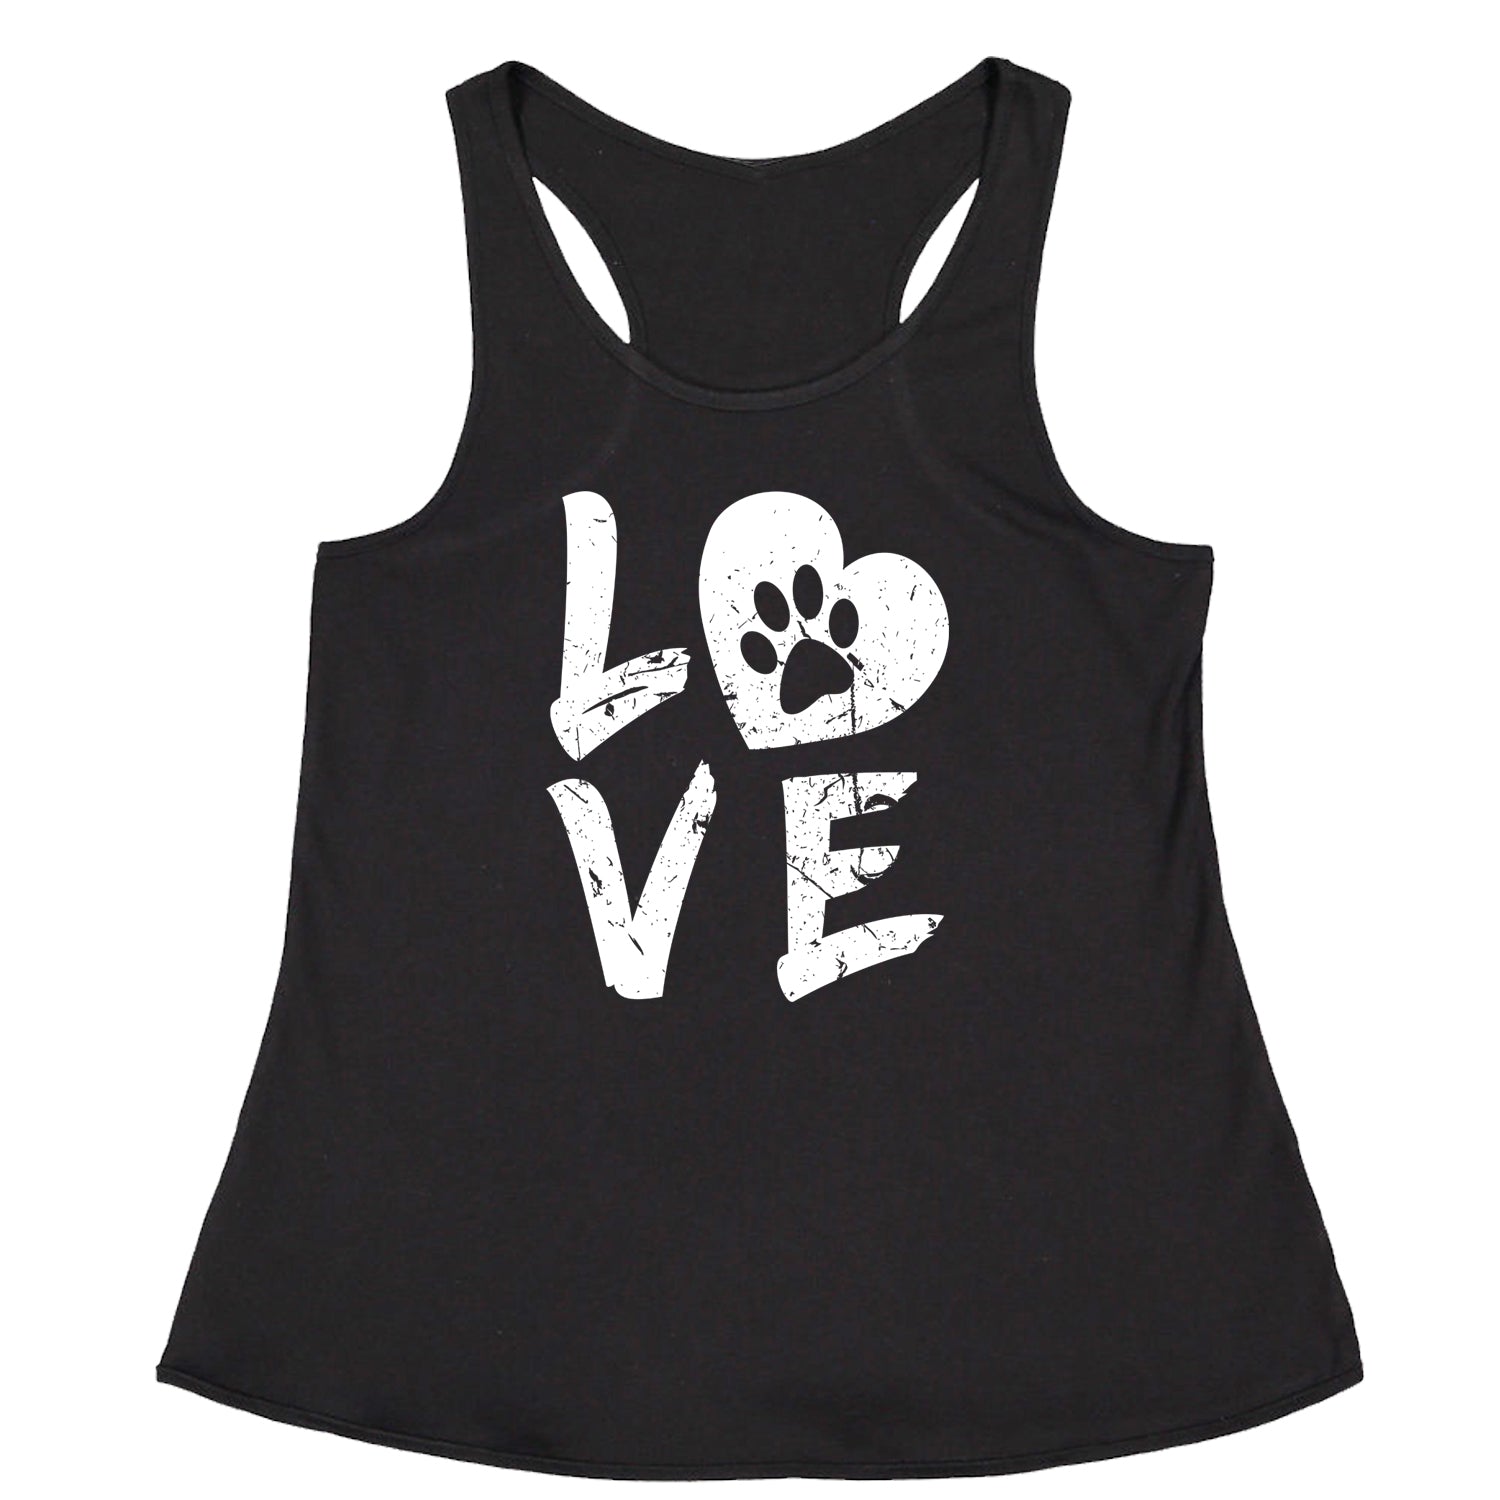 I Love My Dog Paw Print Racerback Tank Top for Women dog, doggie, heart, love, lover, paw, print, puppy by Expression Tees